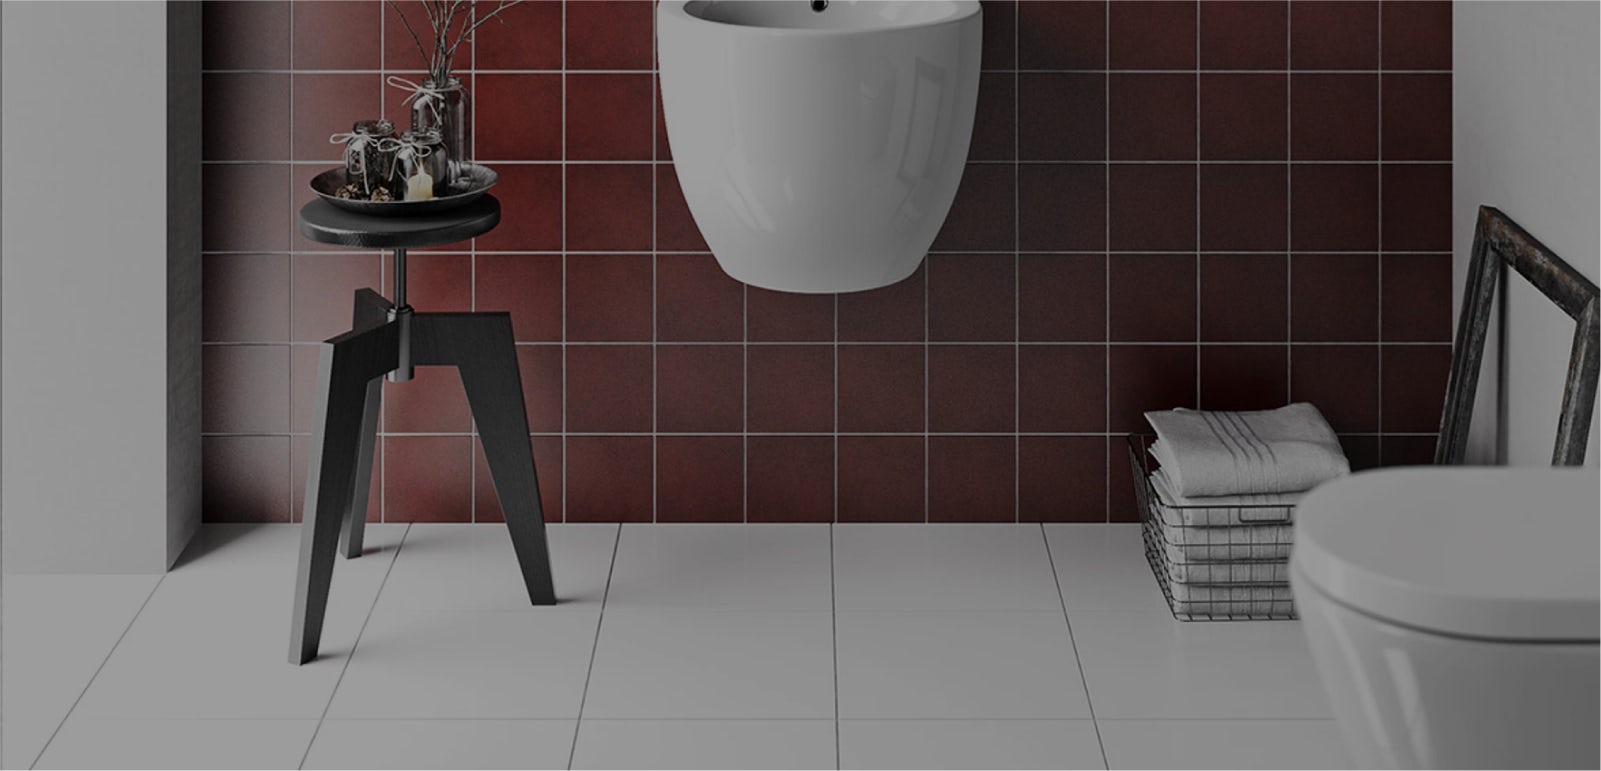 Toilet Before Or After Tiling The Floor, How To Cut Tiles Around Toilet Bowl